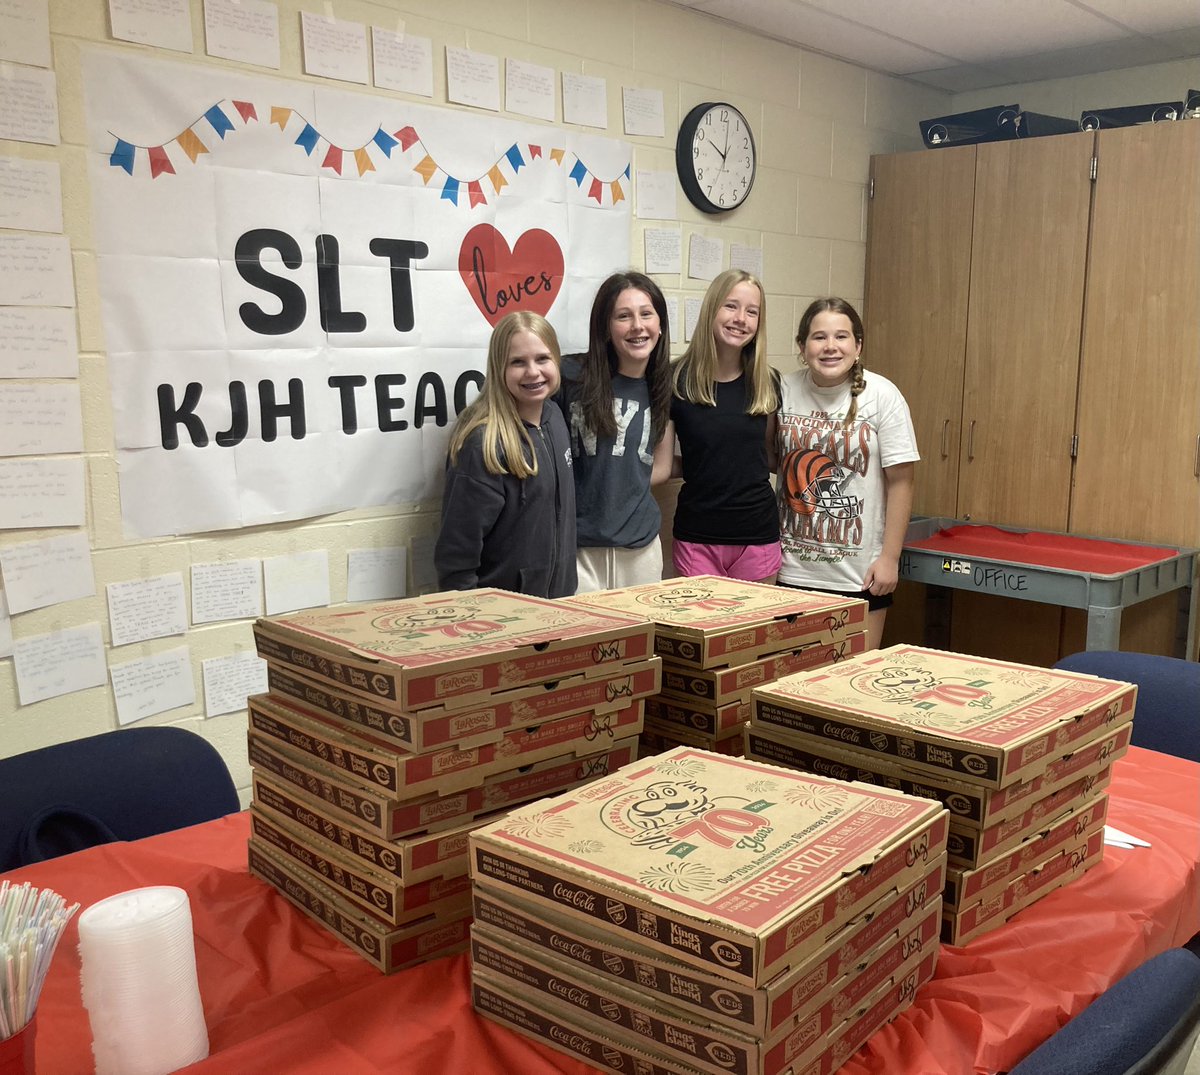 THANK YOU to the KJH Student Leadership Team for providing lunch and thank you cards to our teachers today! Special thanks to @LaRosasPizza and @rootbeerstand for your donation and support! #StrongerTogether @Kings_Schools